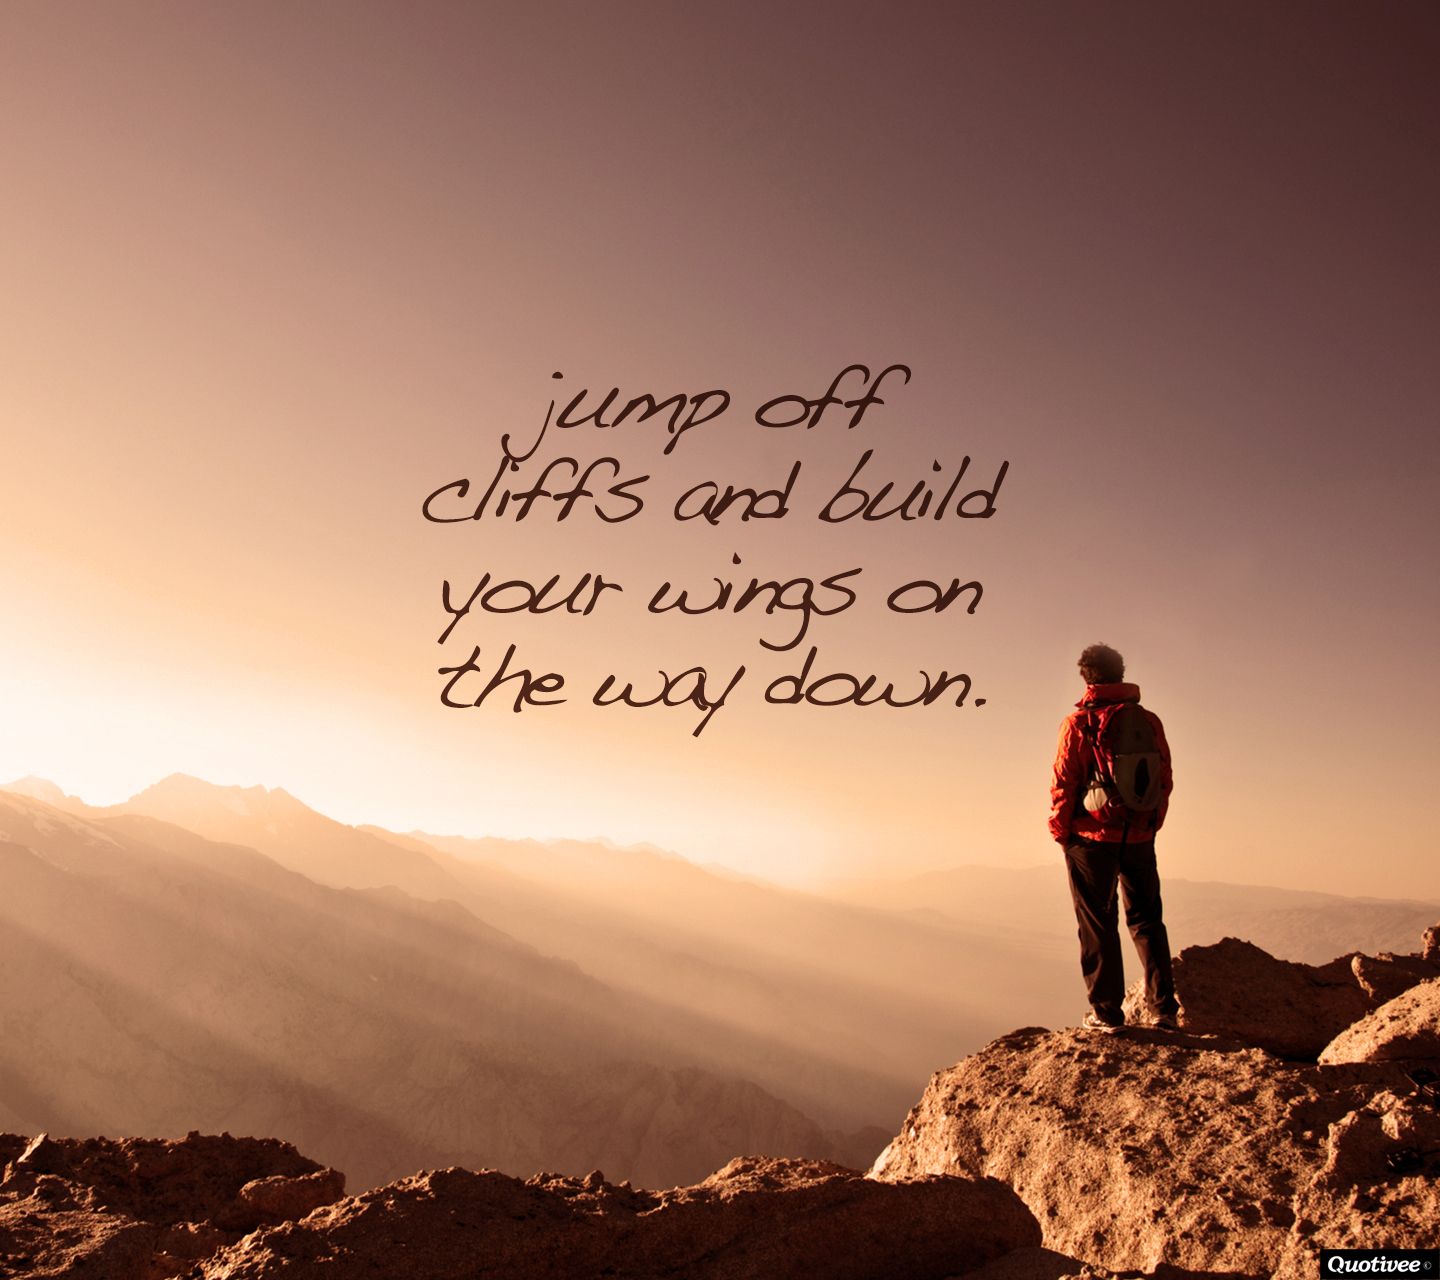 Build Your Wings - Inspirational Quotes Quotivee